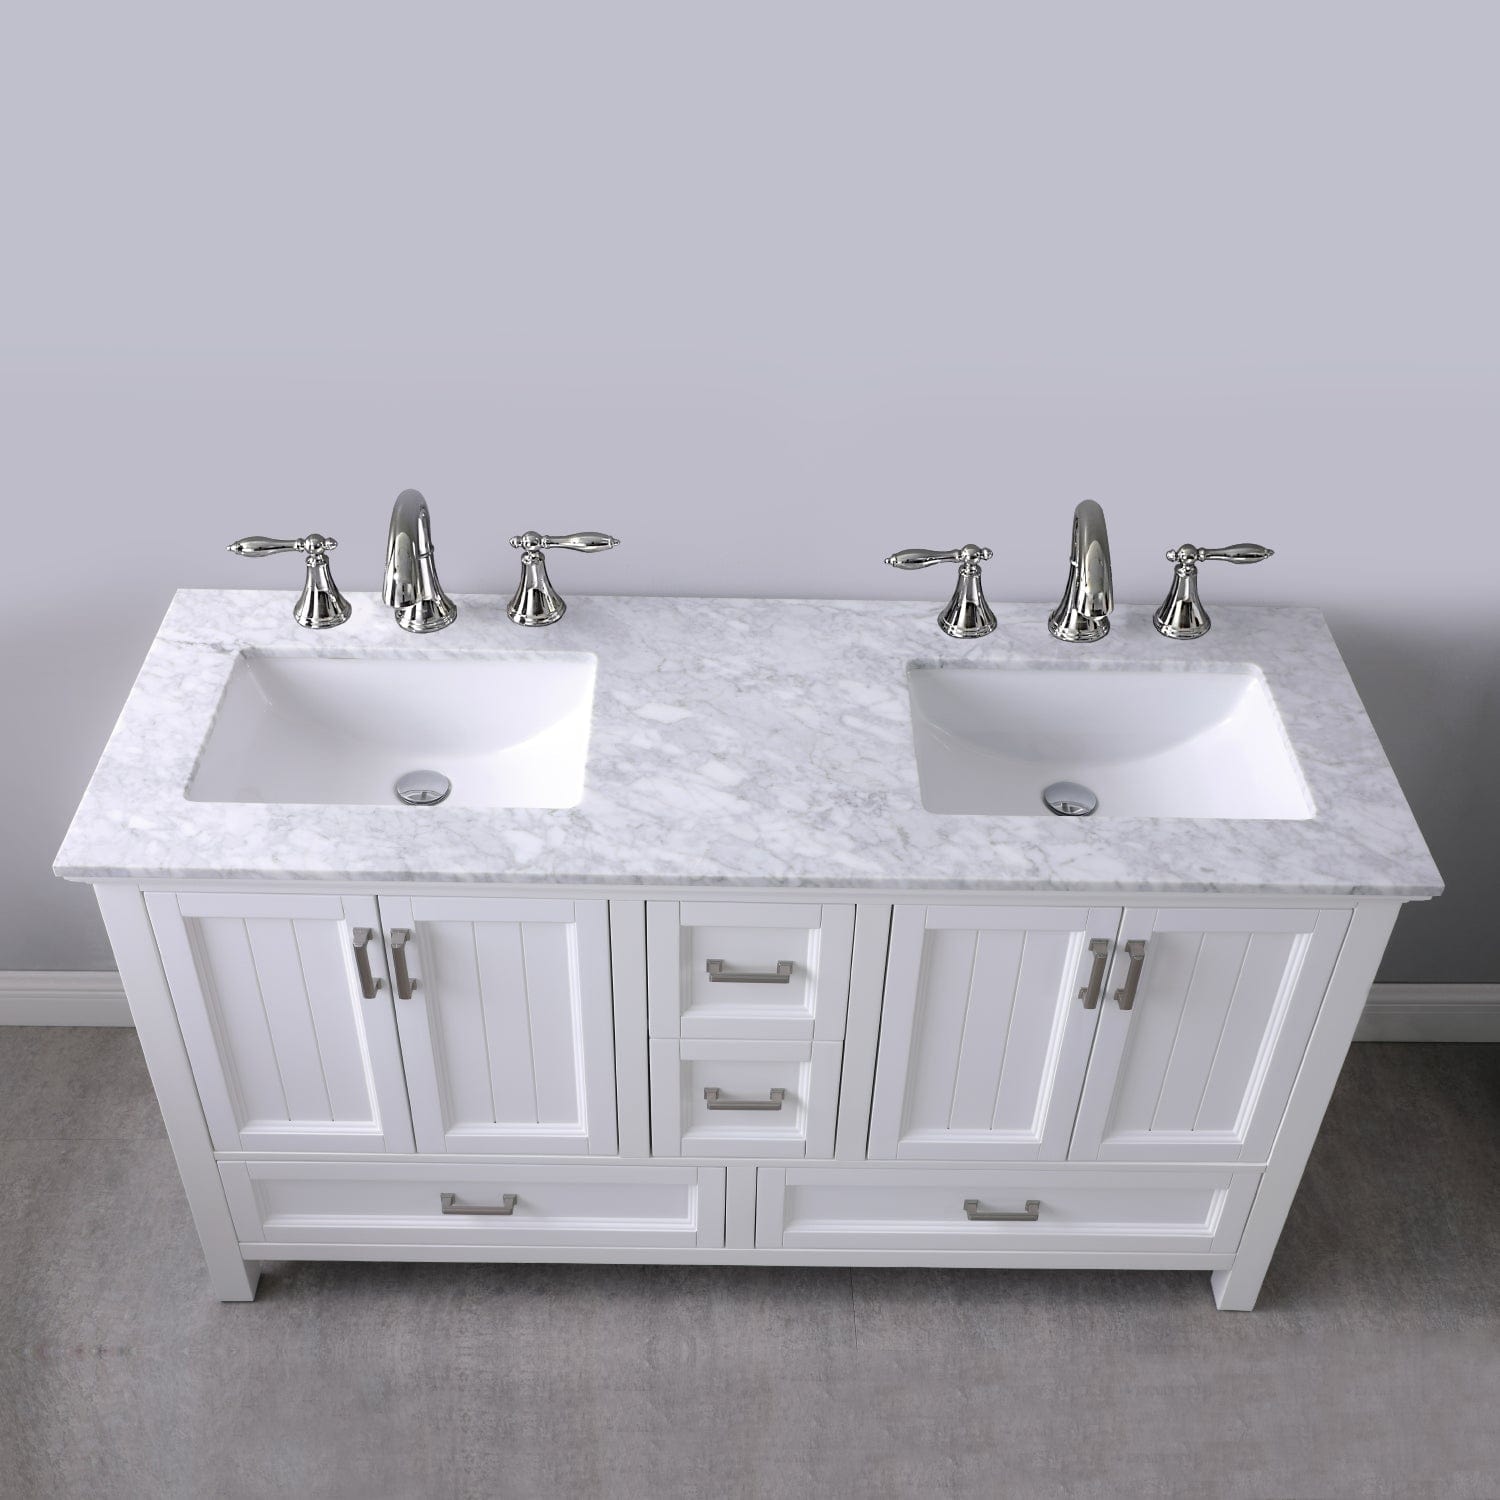 Altair Isla 60" Double Bathroom Vanity Set in White and Carrara White Marble Countertop without Mirror 538060-WH-CA-NM - Molaix631112970945Vanity538060-WH-CA-NM